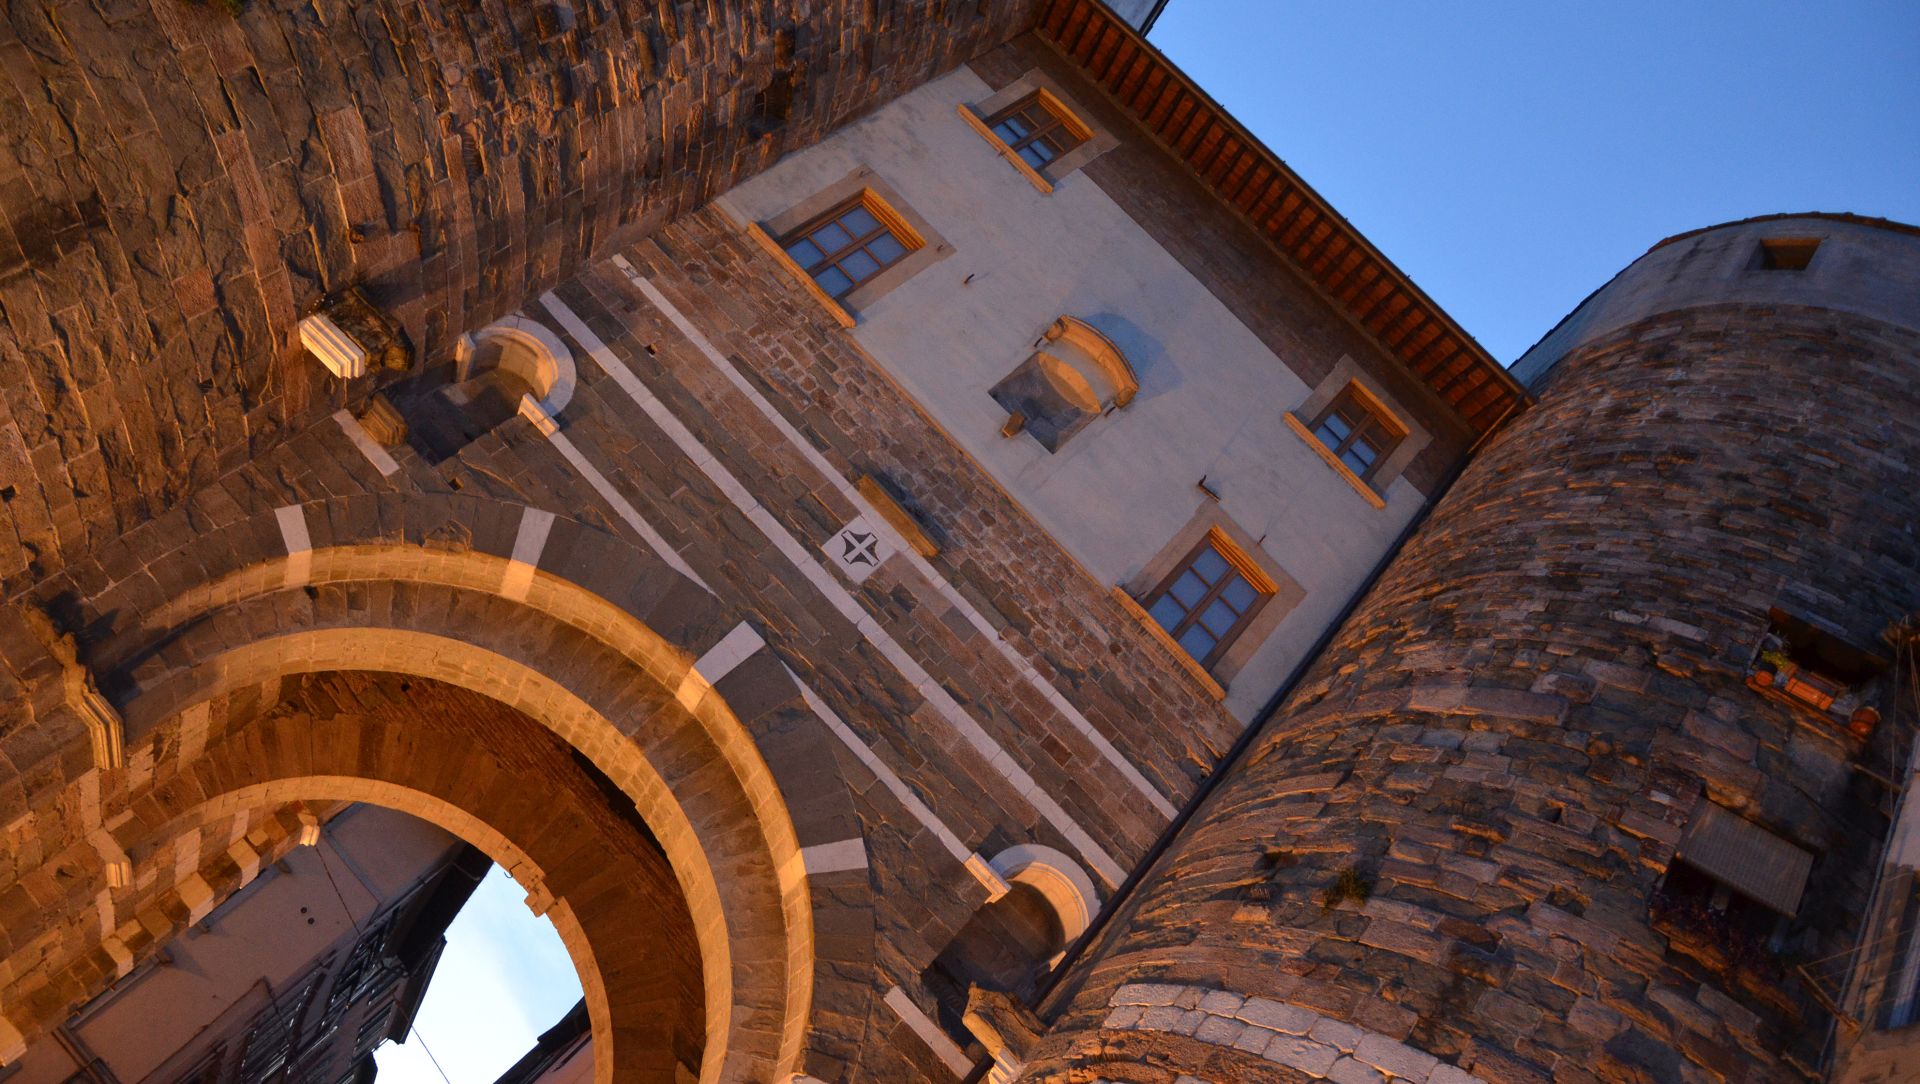 the san gervasio gate of the medieval walls of Lucca